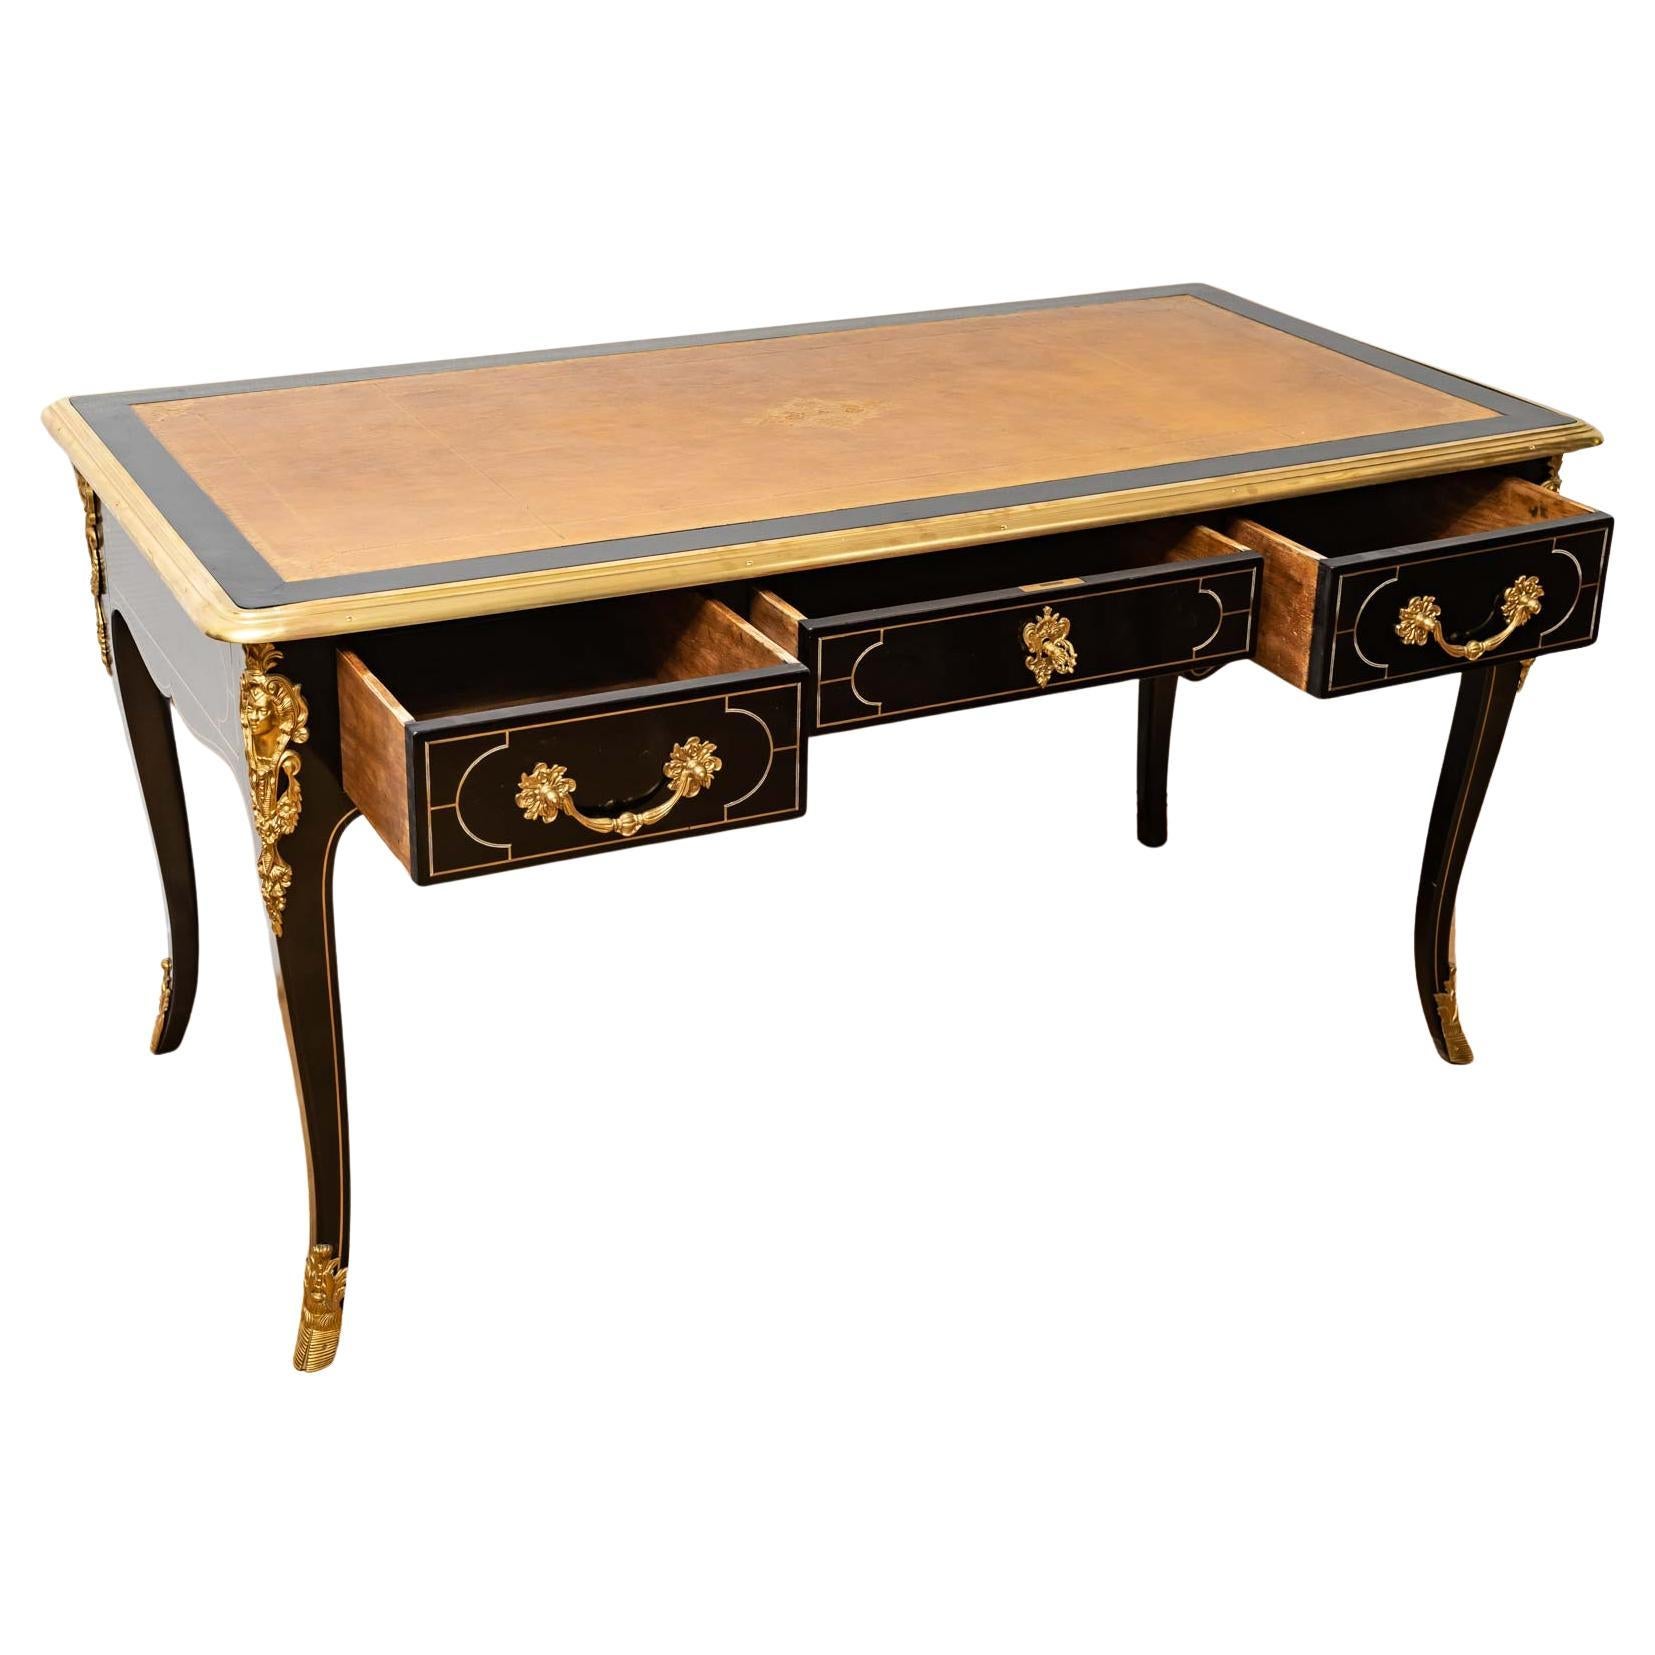 Magnificent Flat Desk in Blackened Wood and Bronzes, Napoleon III Style For Sale